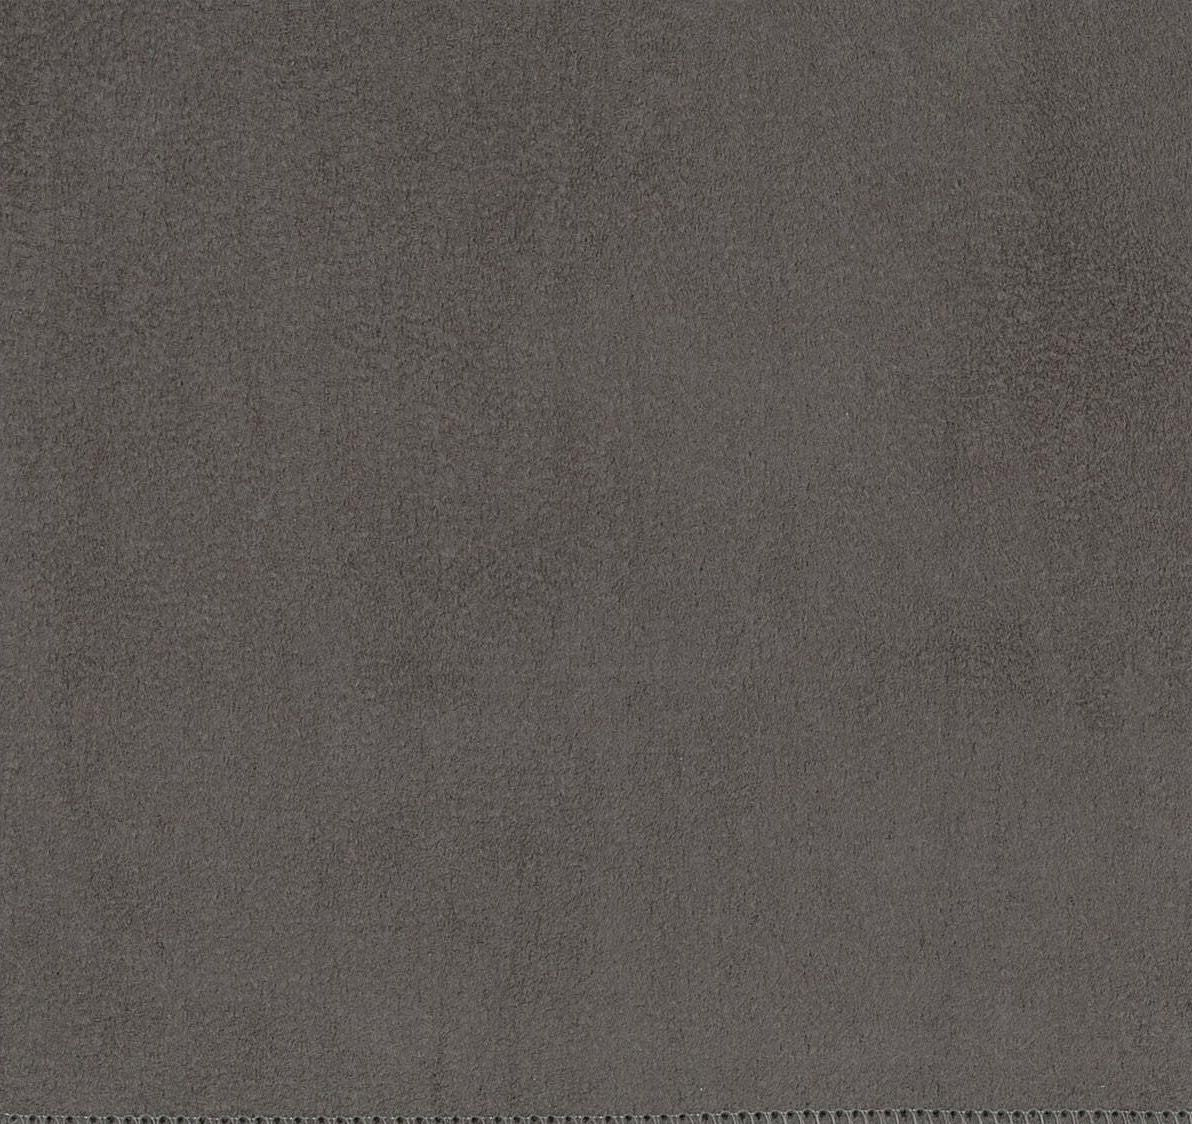 Sarabelle Suede fabric in elephant color - pattern number H6 0004SARA - by Scalamandre in the Old World Weavers collection